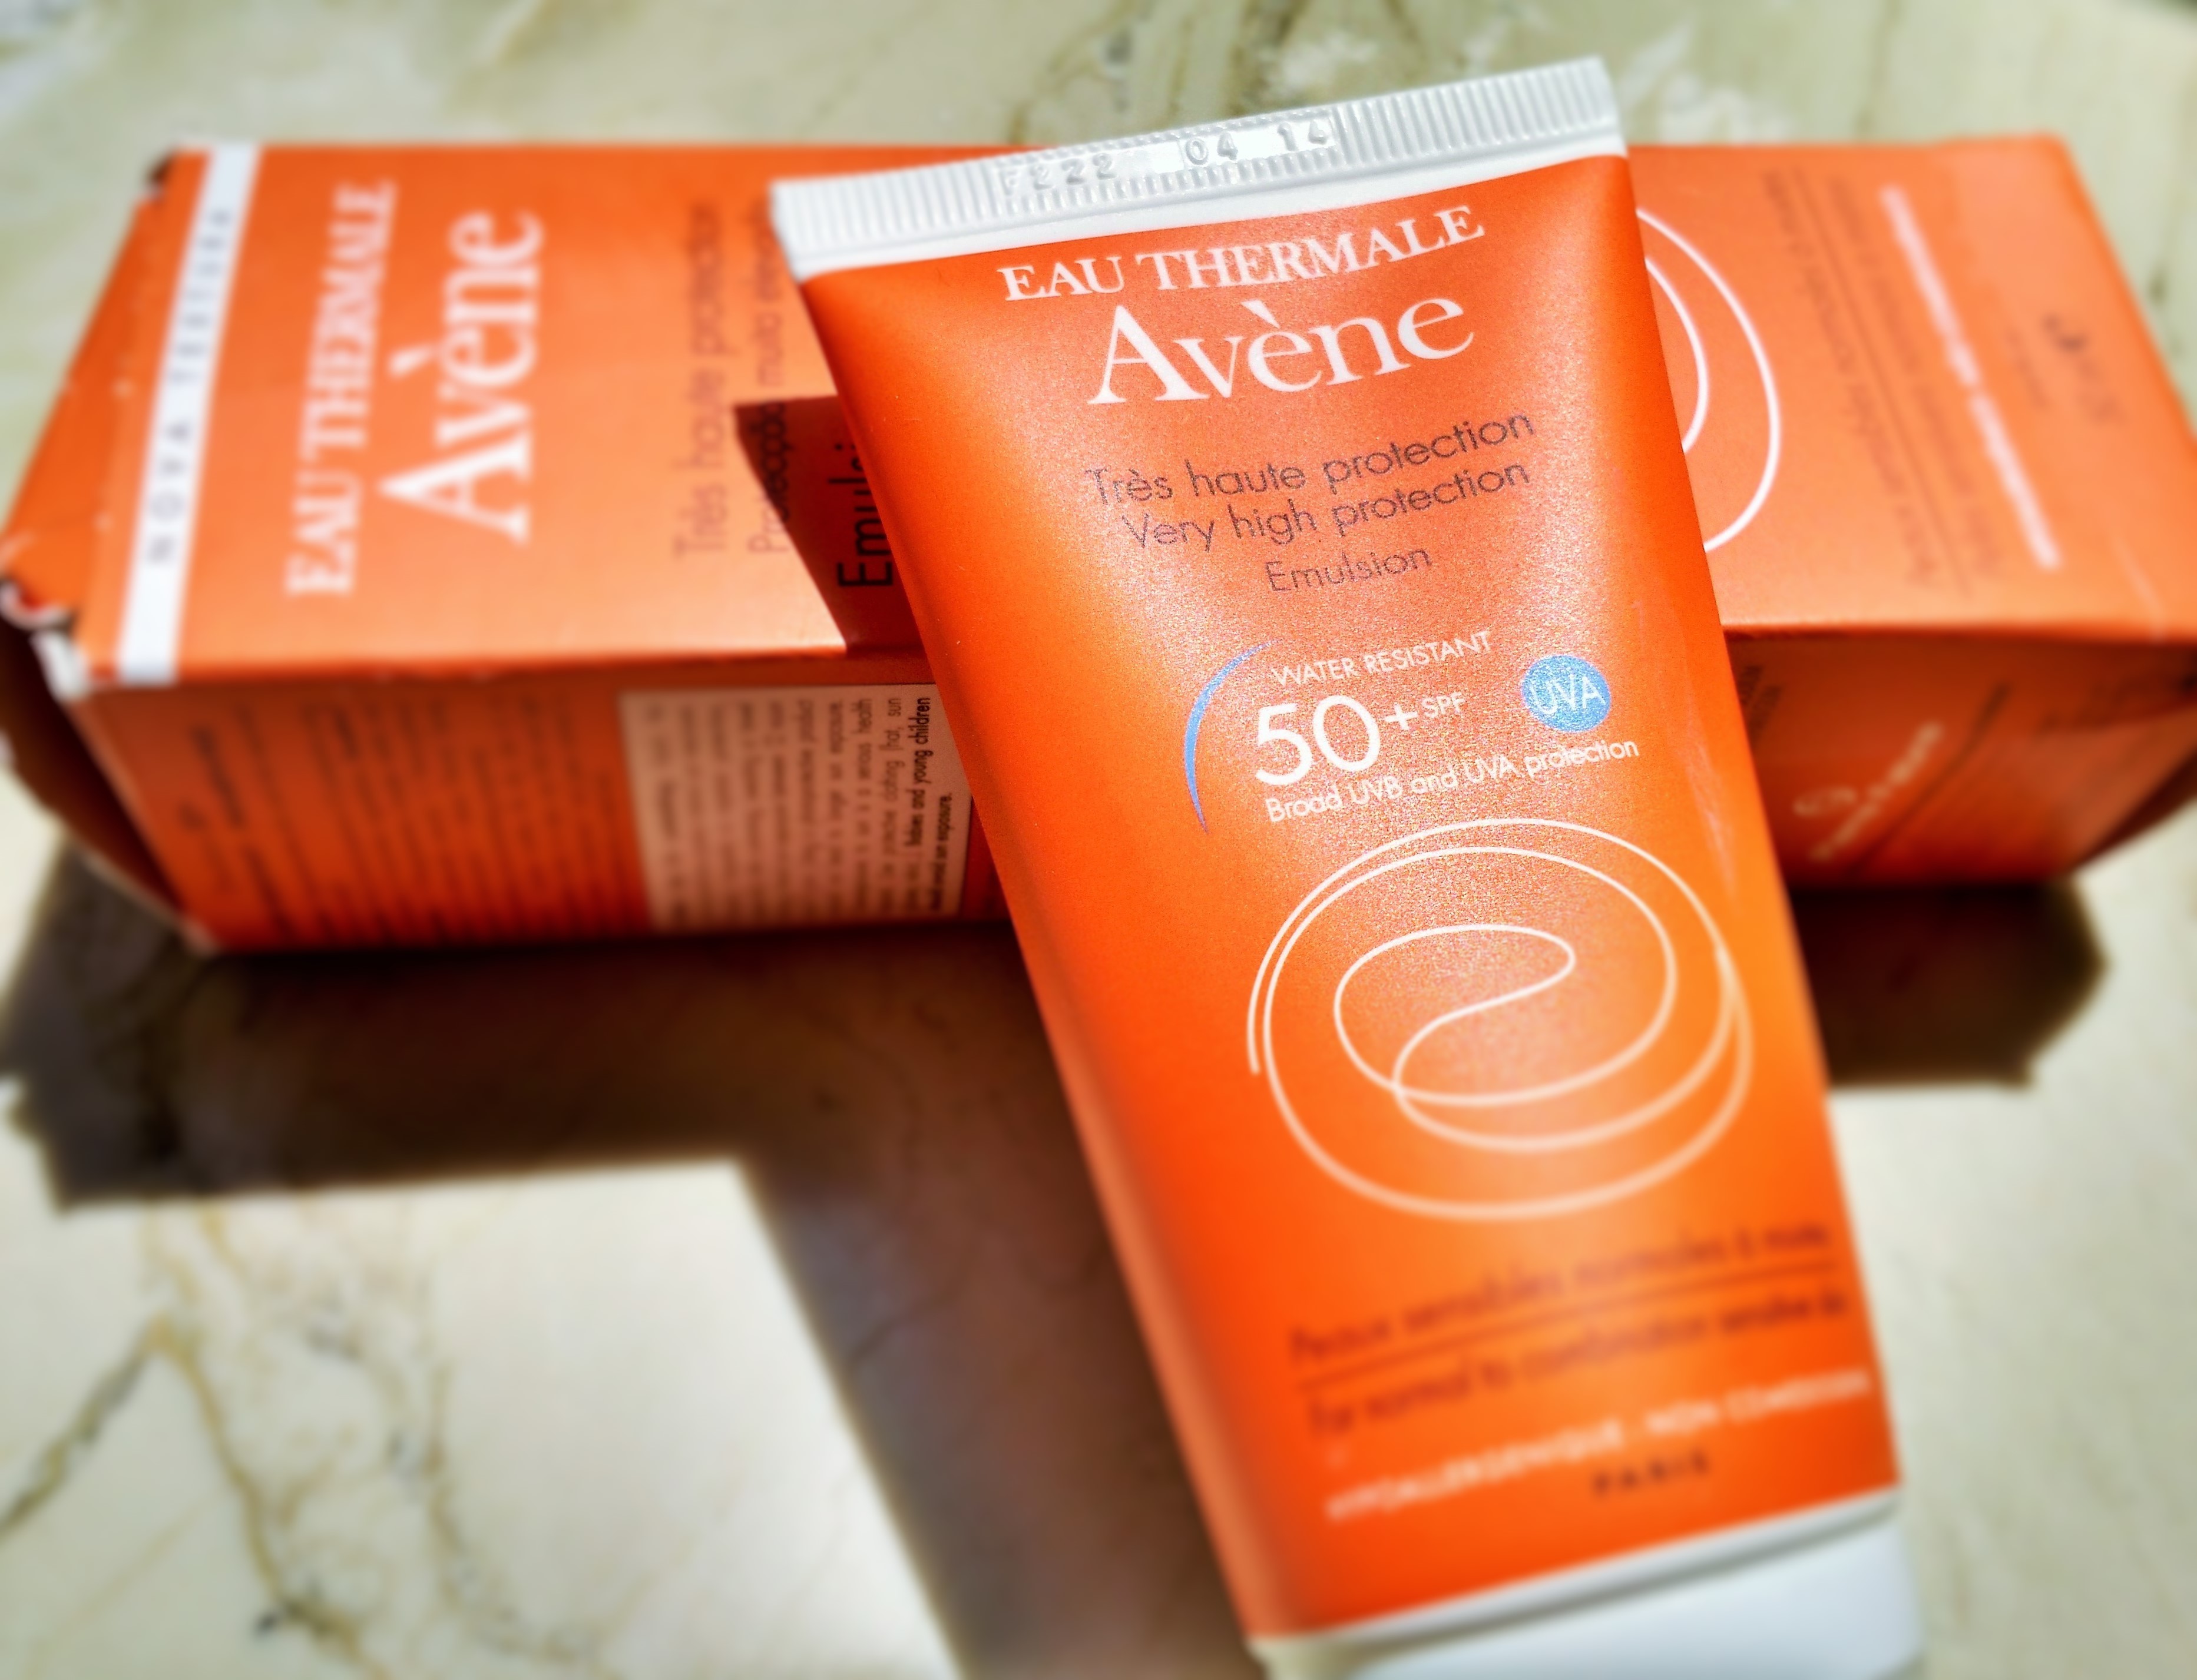 Avene New Dry Touch Very High Protection SPF50+ Emulsion